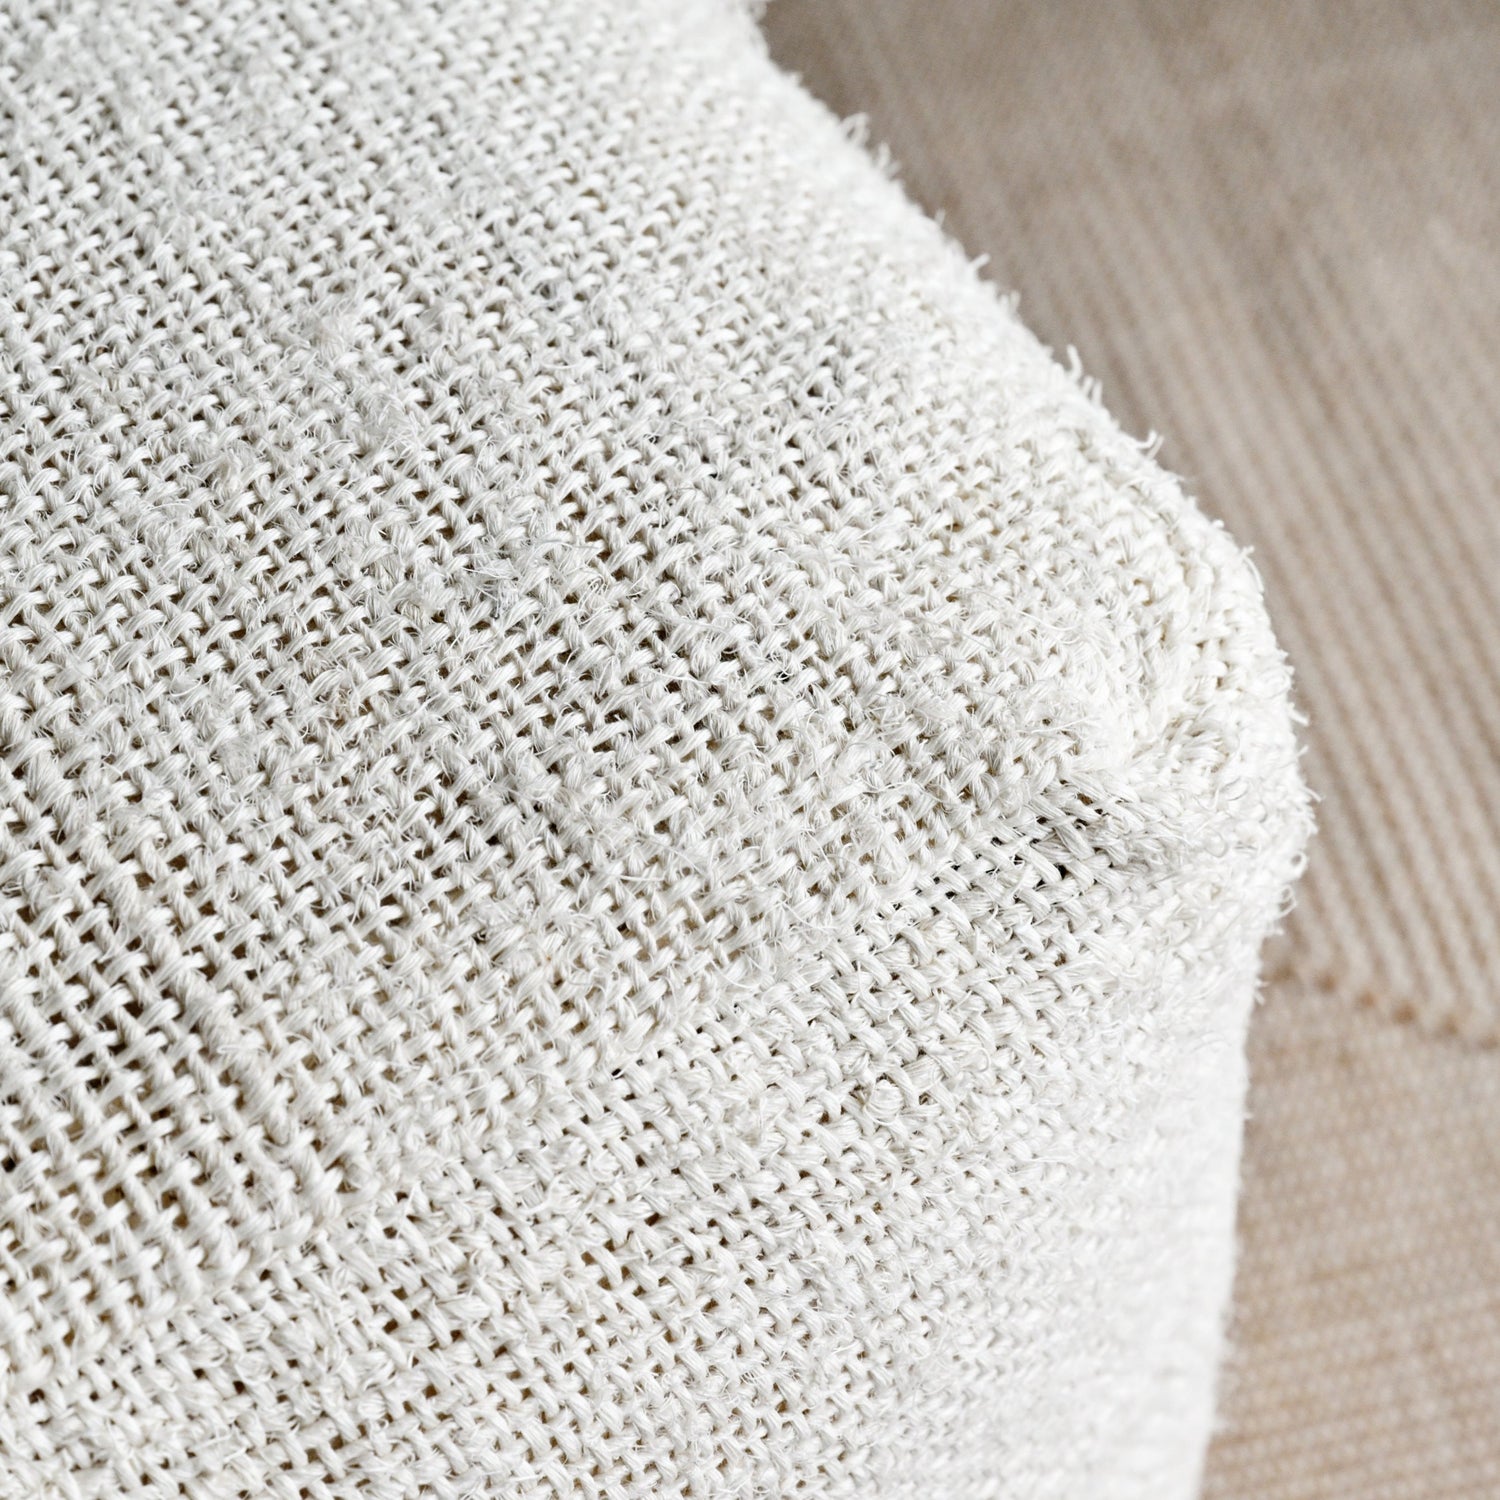 Hari Recycled Linen Pouf